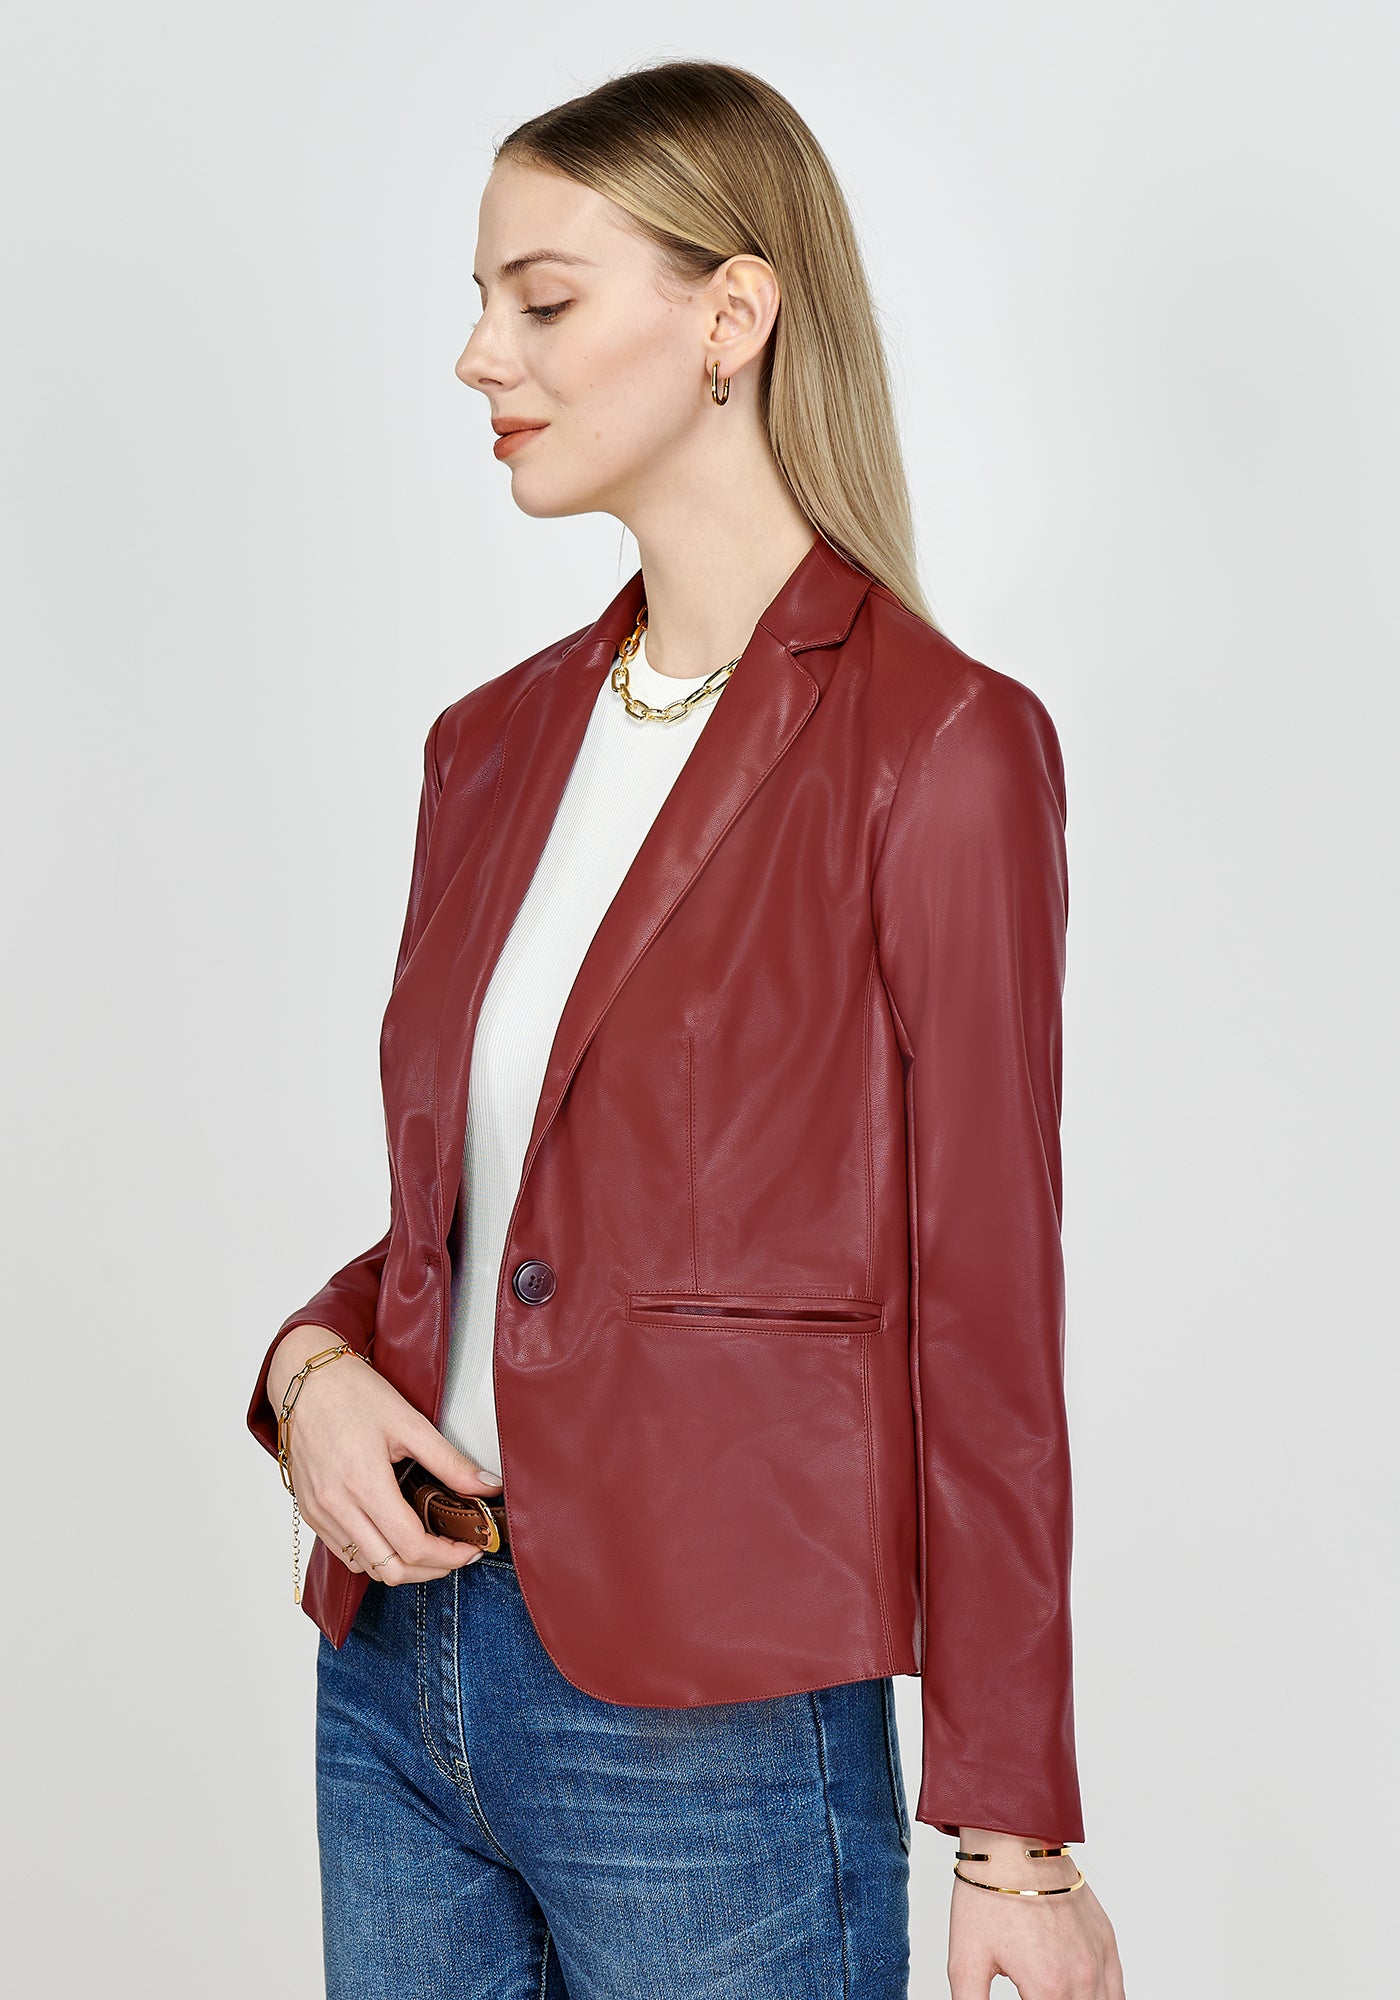 Tapata Straight Dress Pants  This $45 Blazer Is a Perfect Dupe of